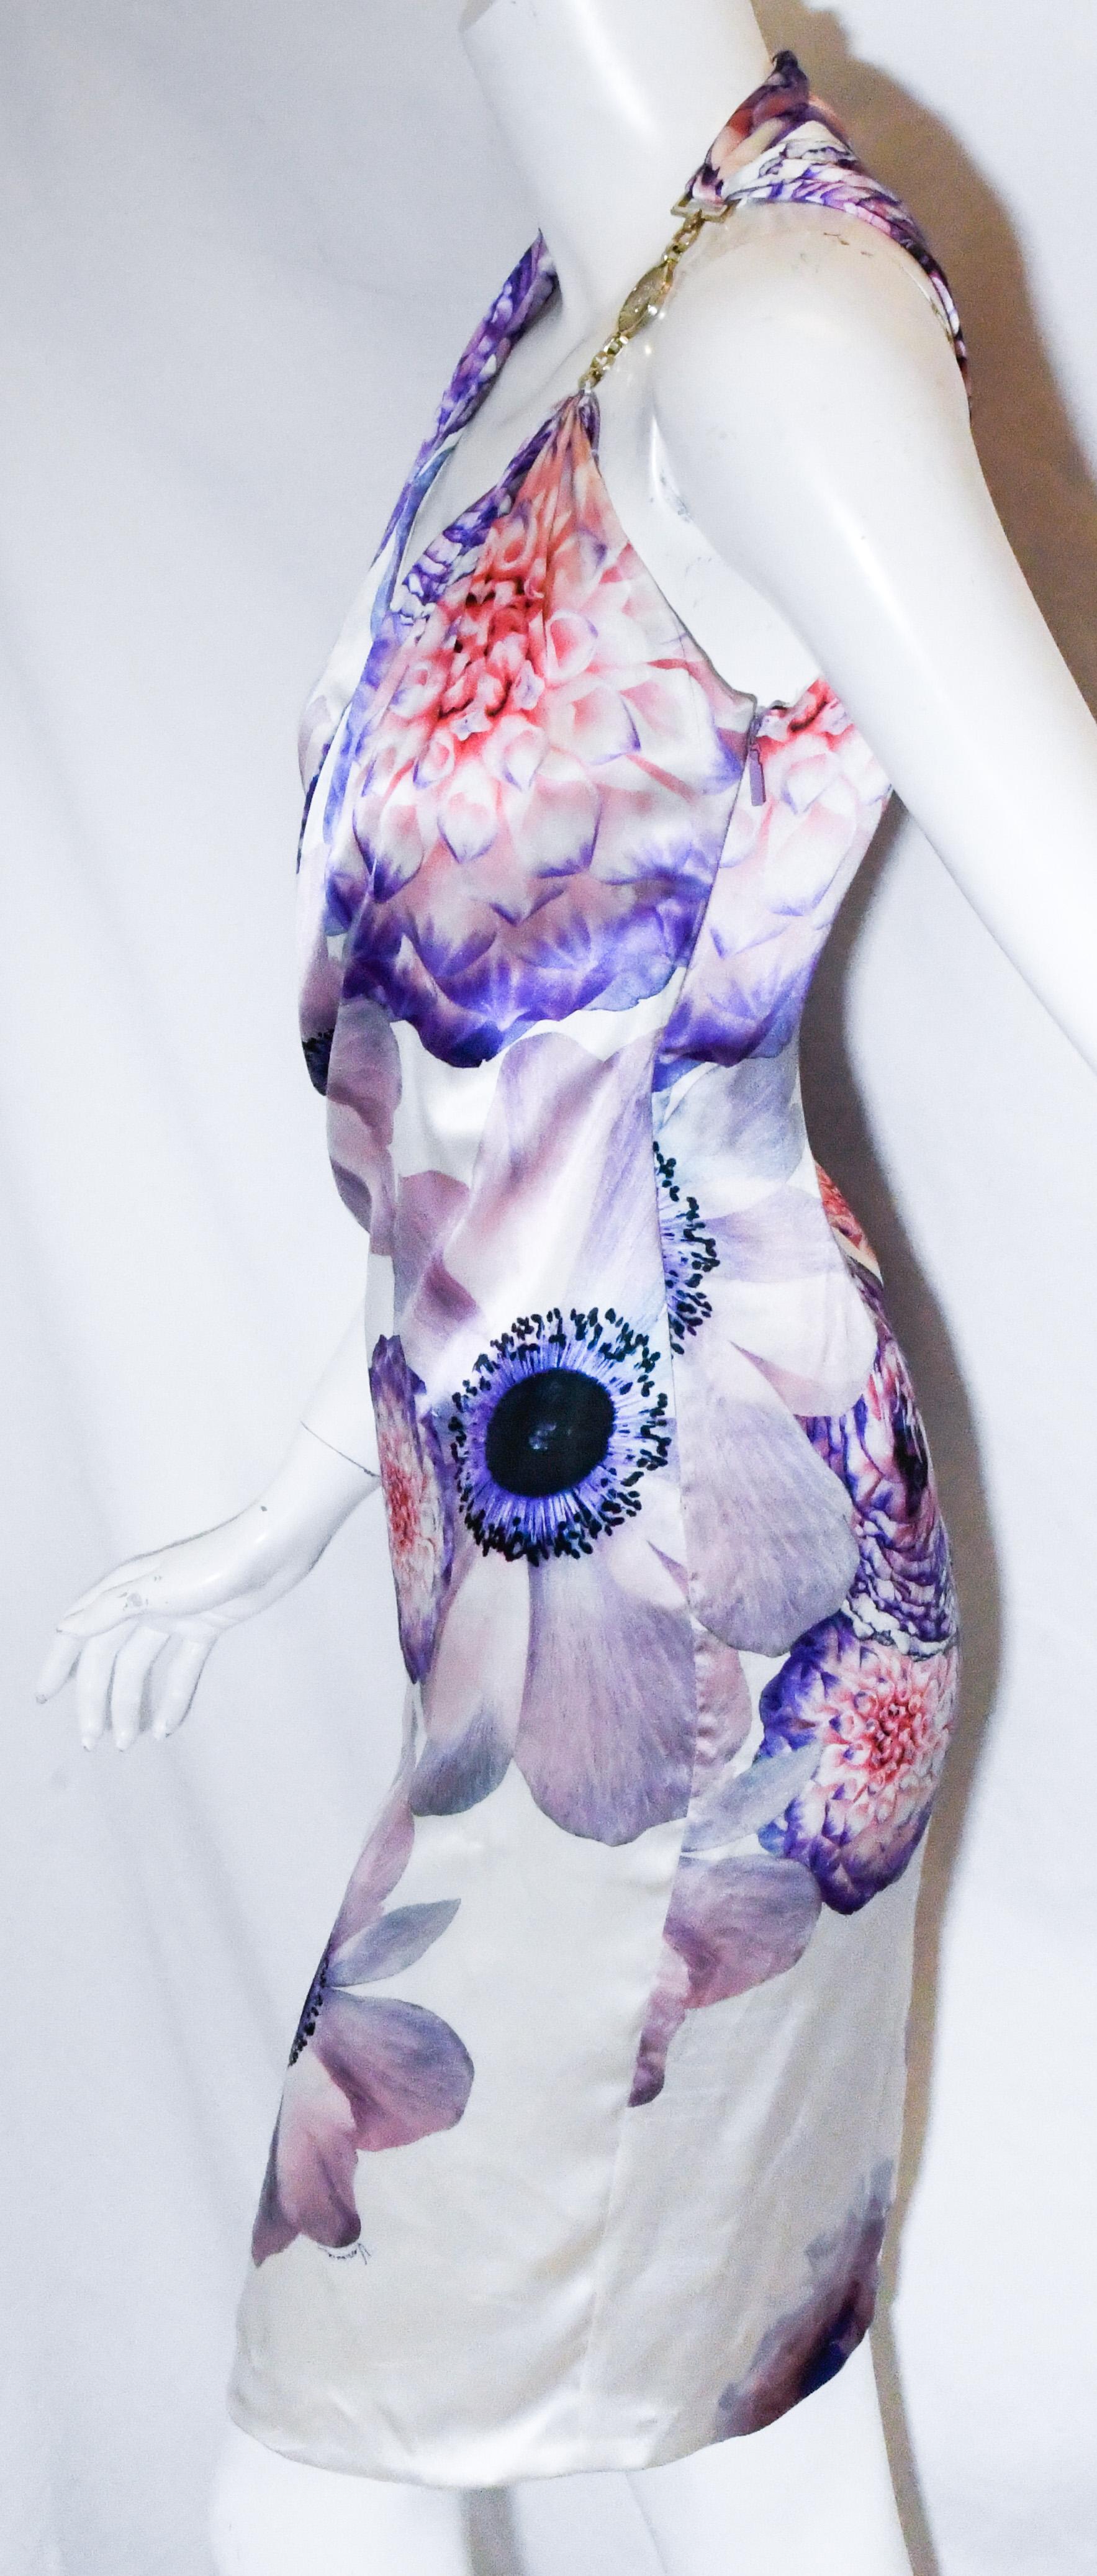 Versace halter dress composed of silk fabric with white base and large purple flowers.  This dress can be worn for a daytime lunch or an evening affair.   The top of this dress has a wrap effect creating a deep V neck decolletage in this sexy,